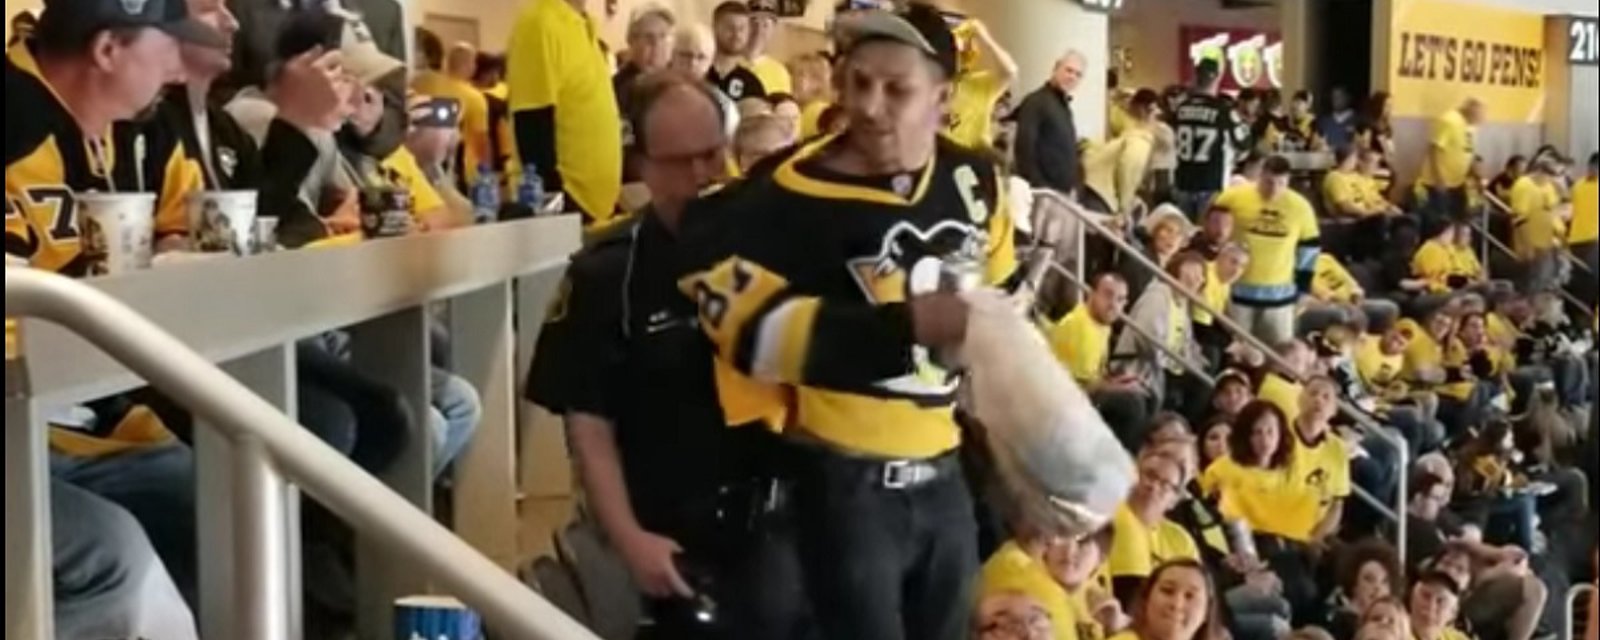 Breaking: Penguins fan gets in security's face, gets tazed at the game!